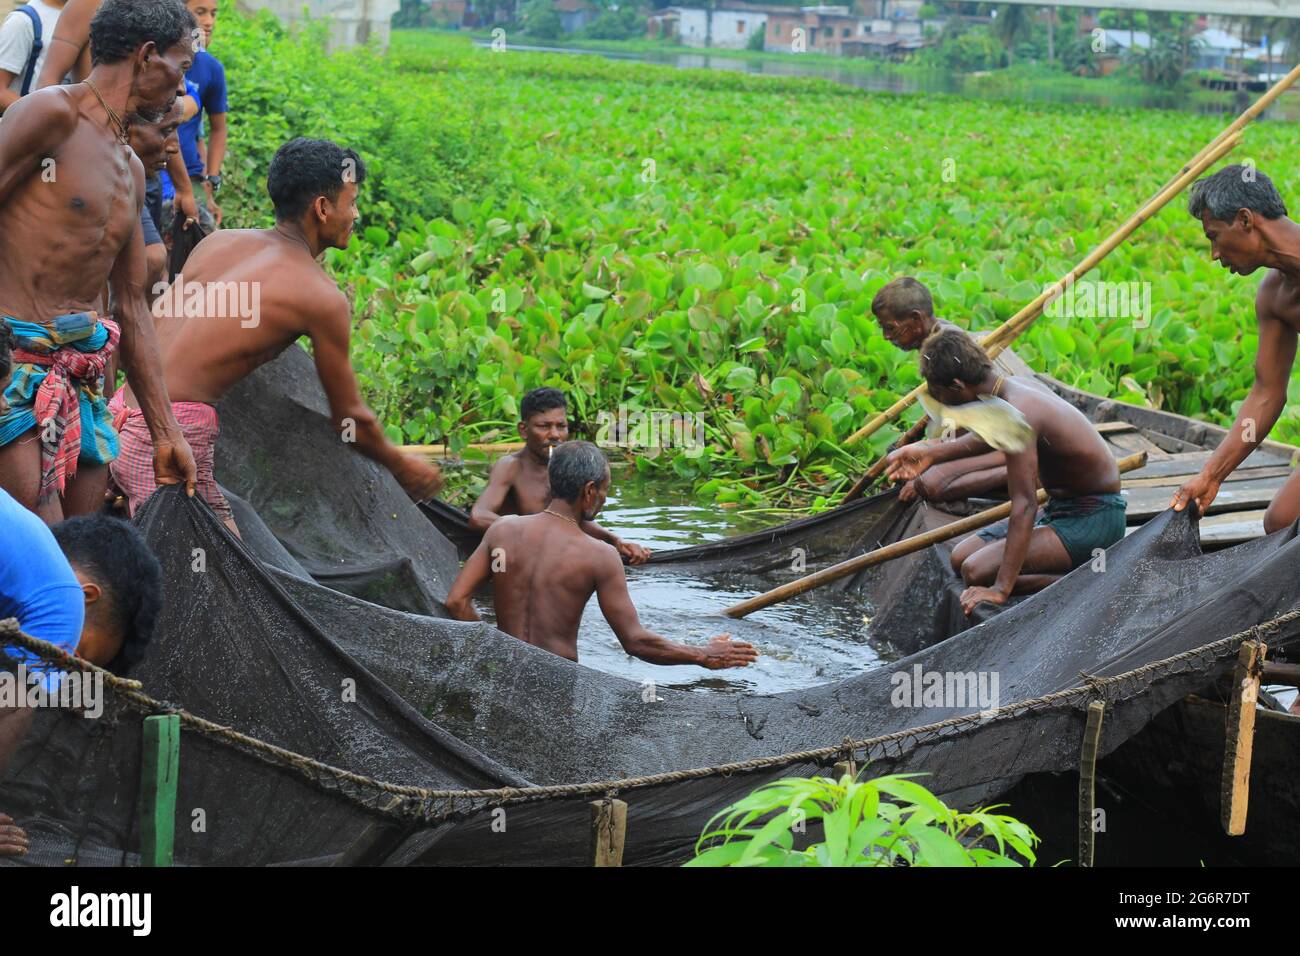 bangladeshi-fisherman-caught-fish-fish-on-hand-fishing-on-the-river-with-fishing-nets-life-of-traditional-fishermen-fishing-in-river-2G6R7DT.jpg